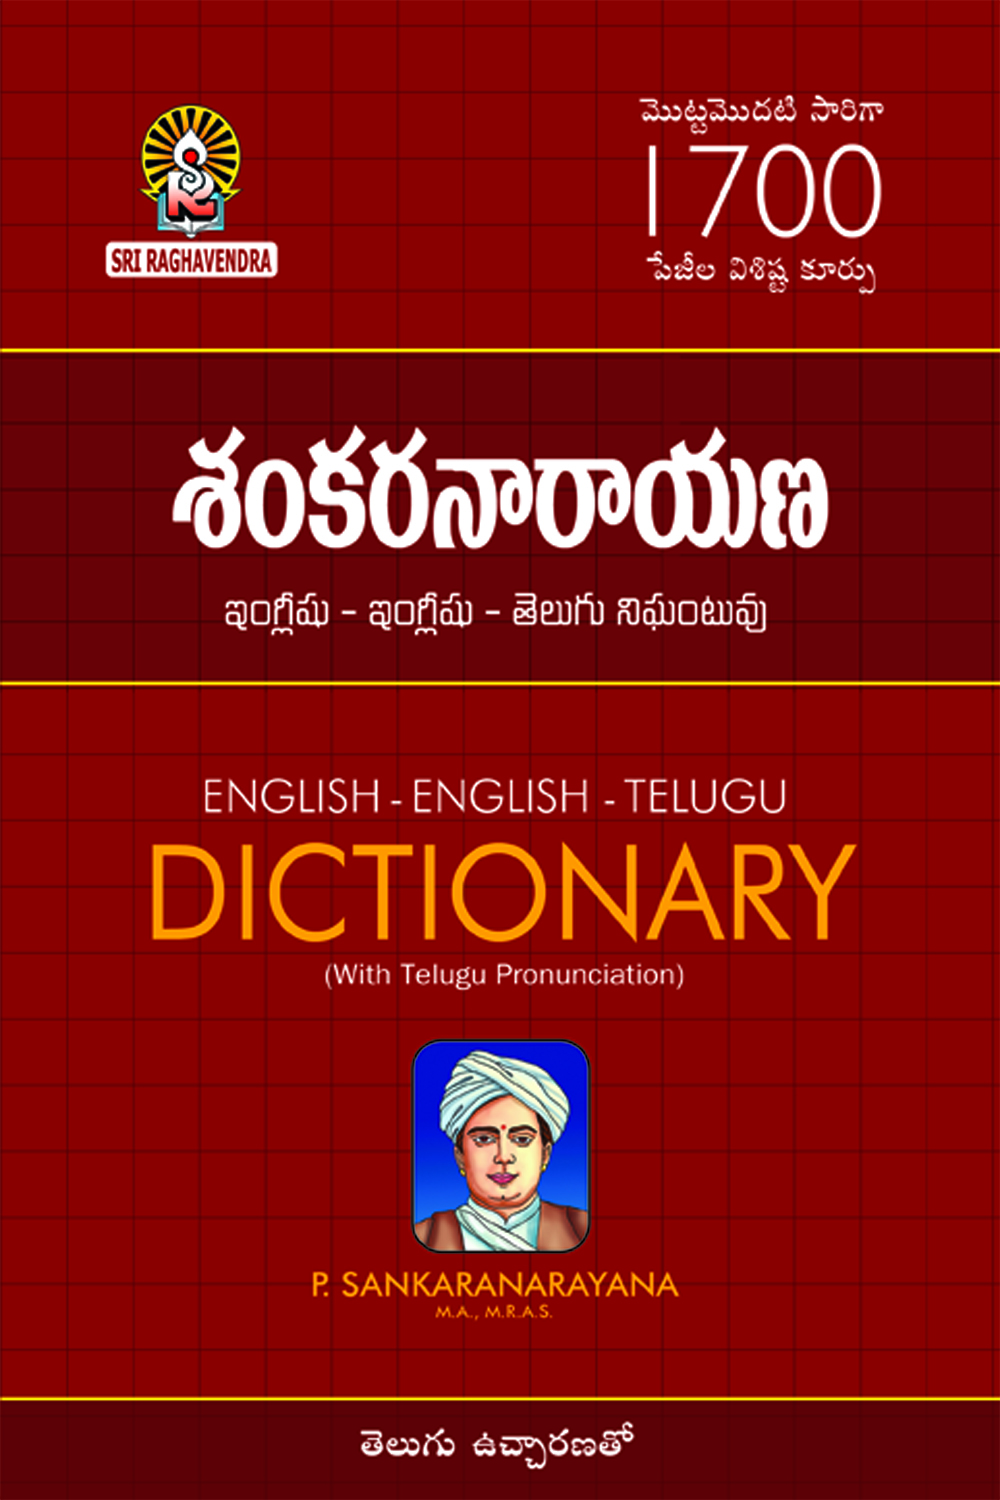 Verbs meanings in telugu and 4 four verb forms | PDF